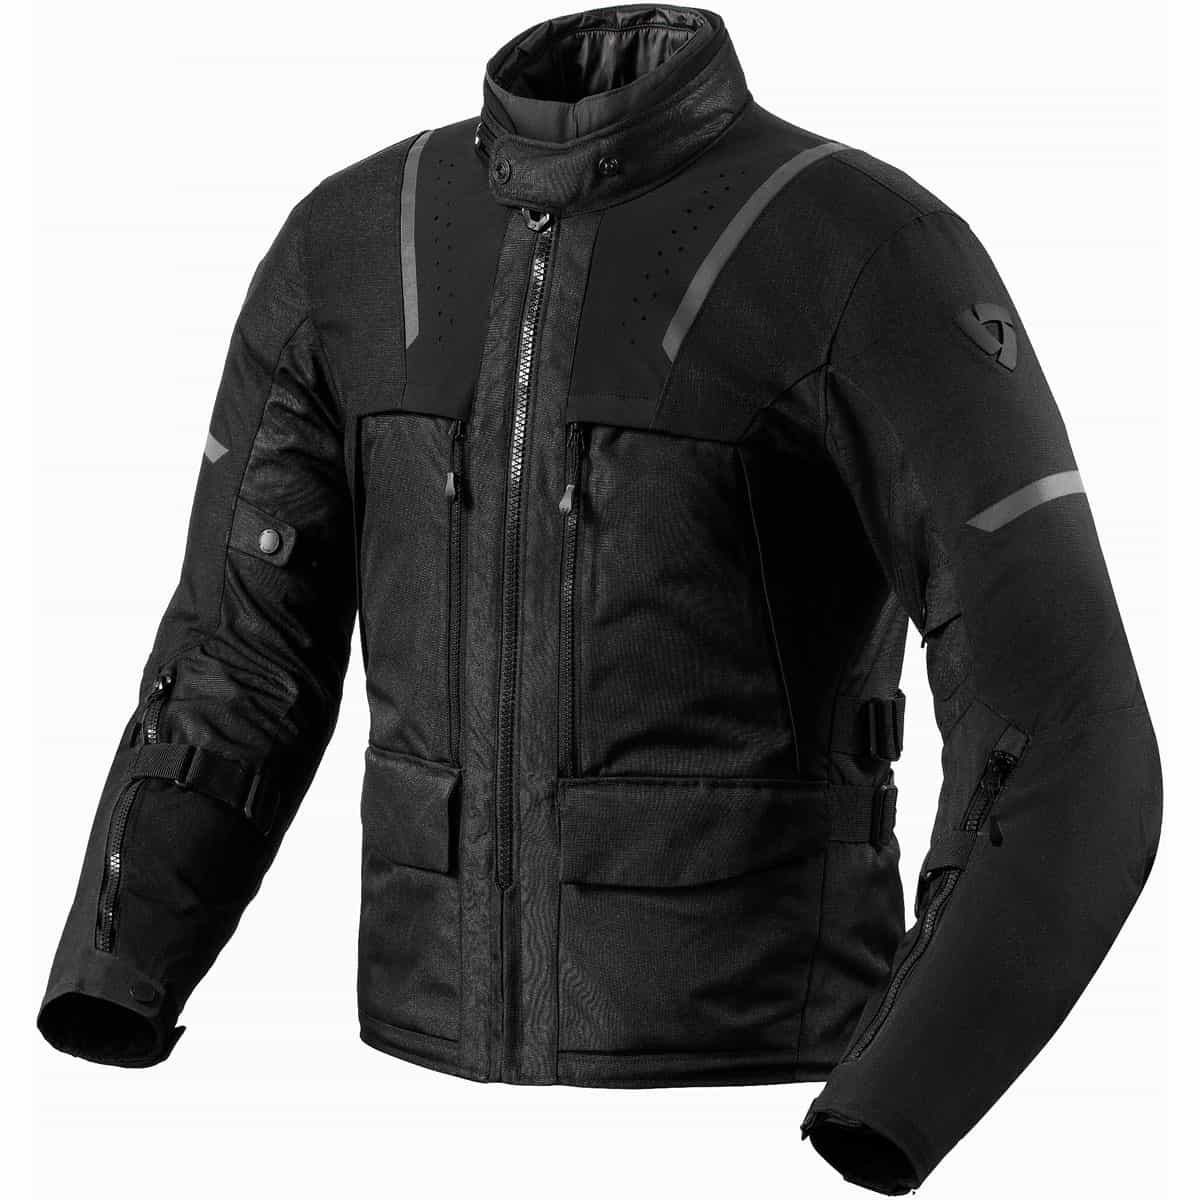 Rev It! Offtrack 2 H2O motorcycle jacket: The ultimate 3-layer adventure riding jacket